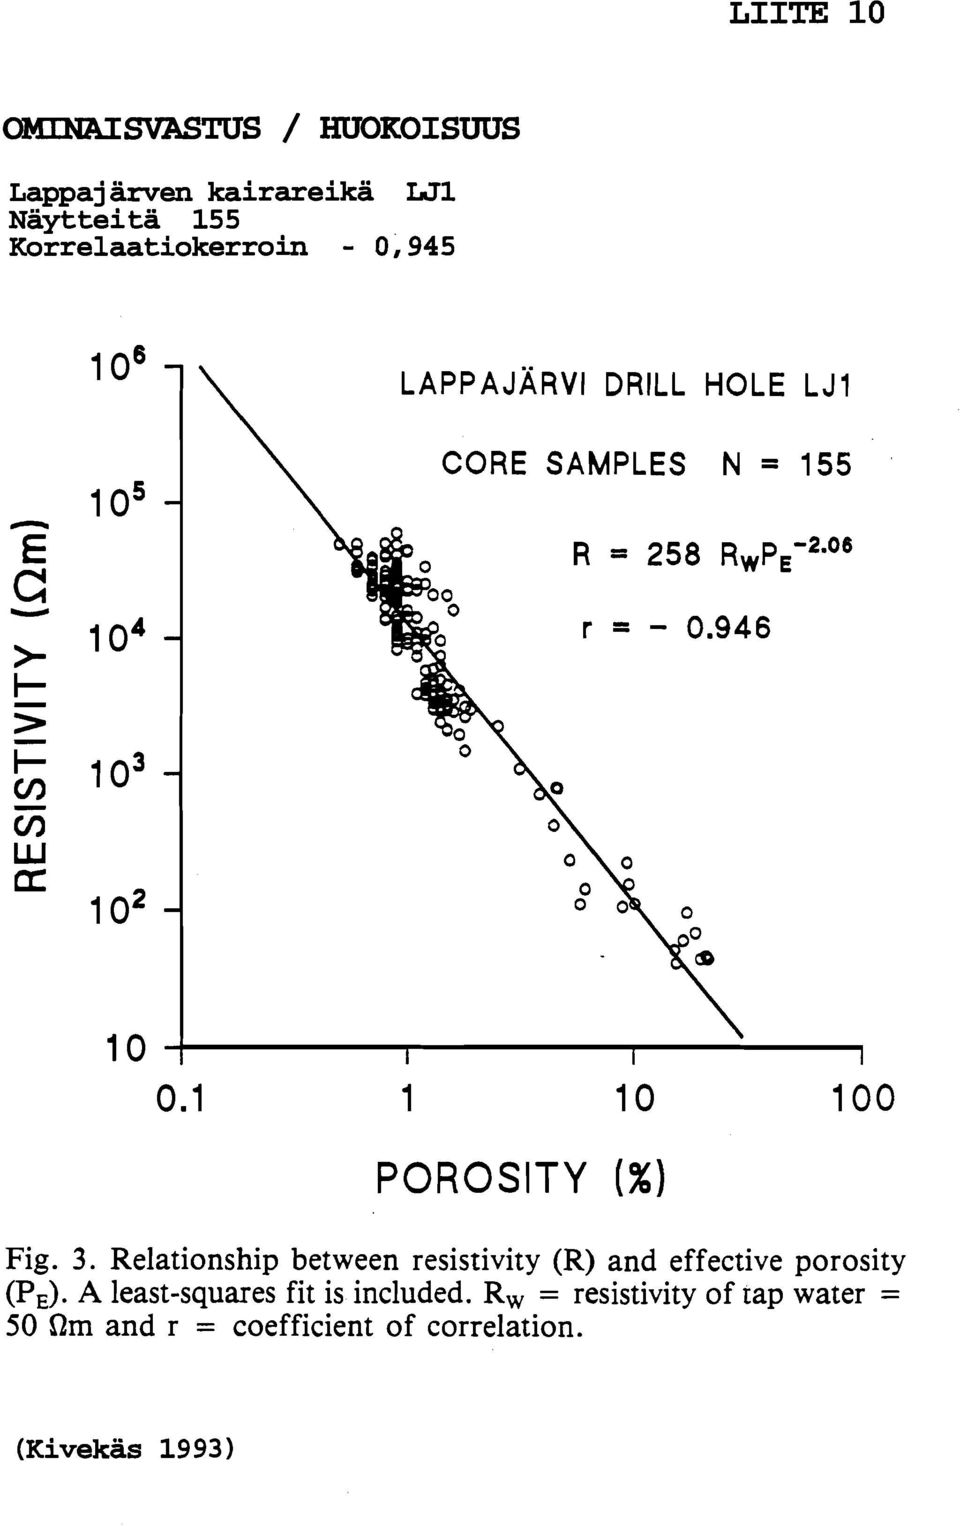 Relationship between resistivity (R) and effective porosity (P,).